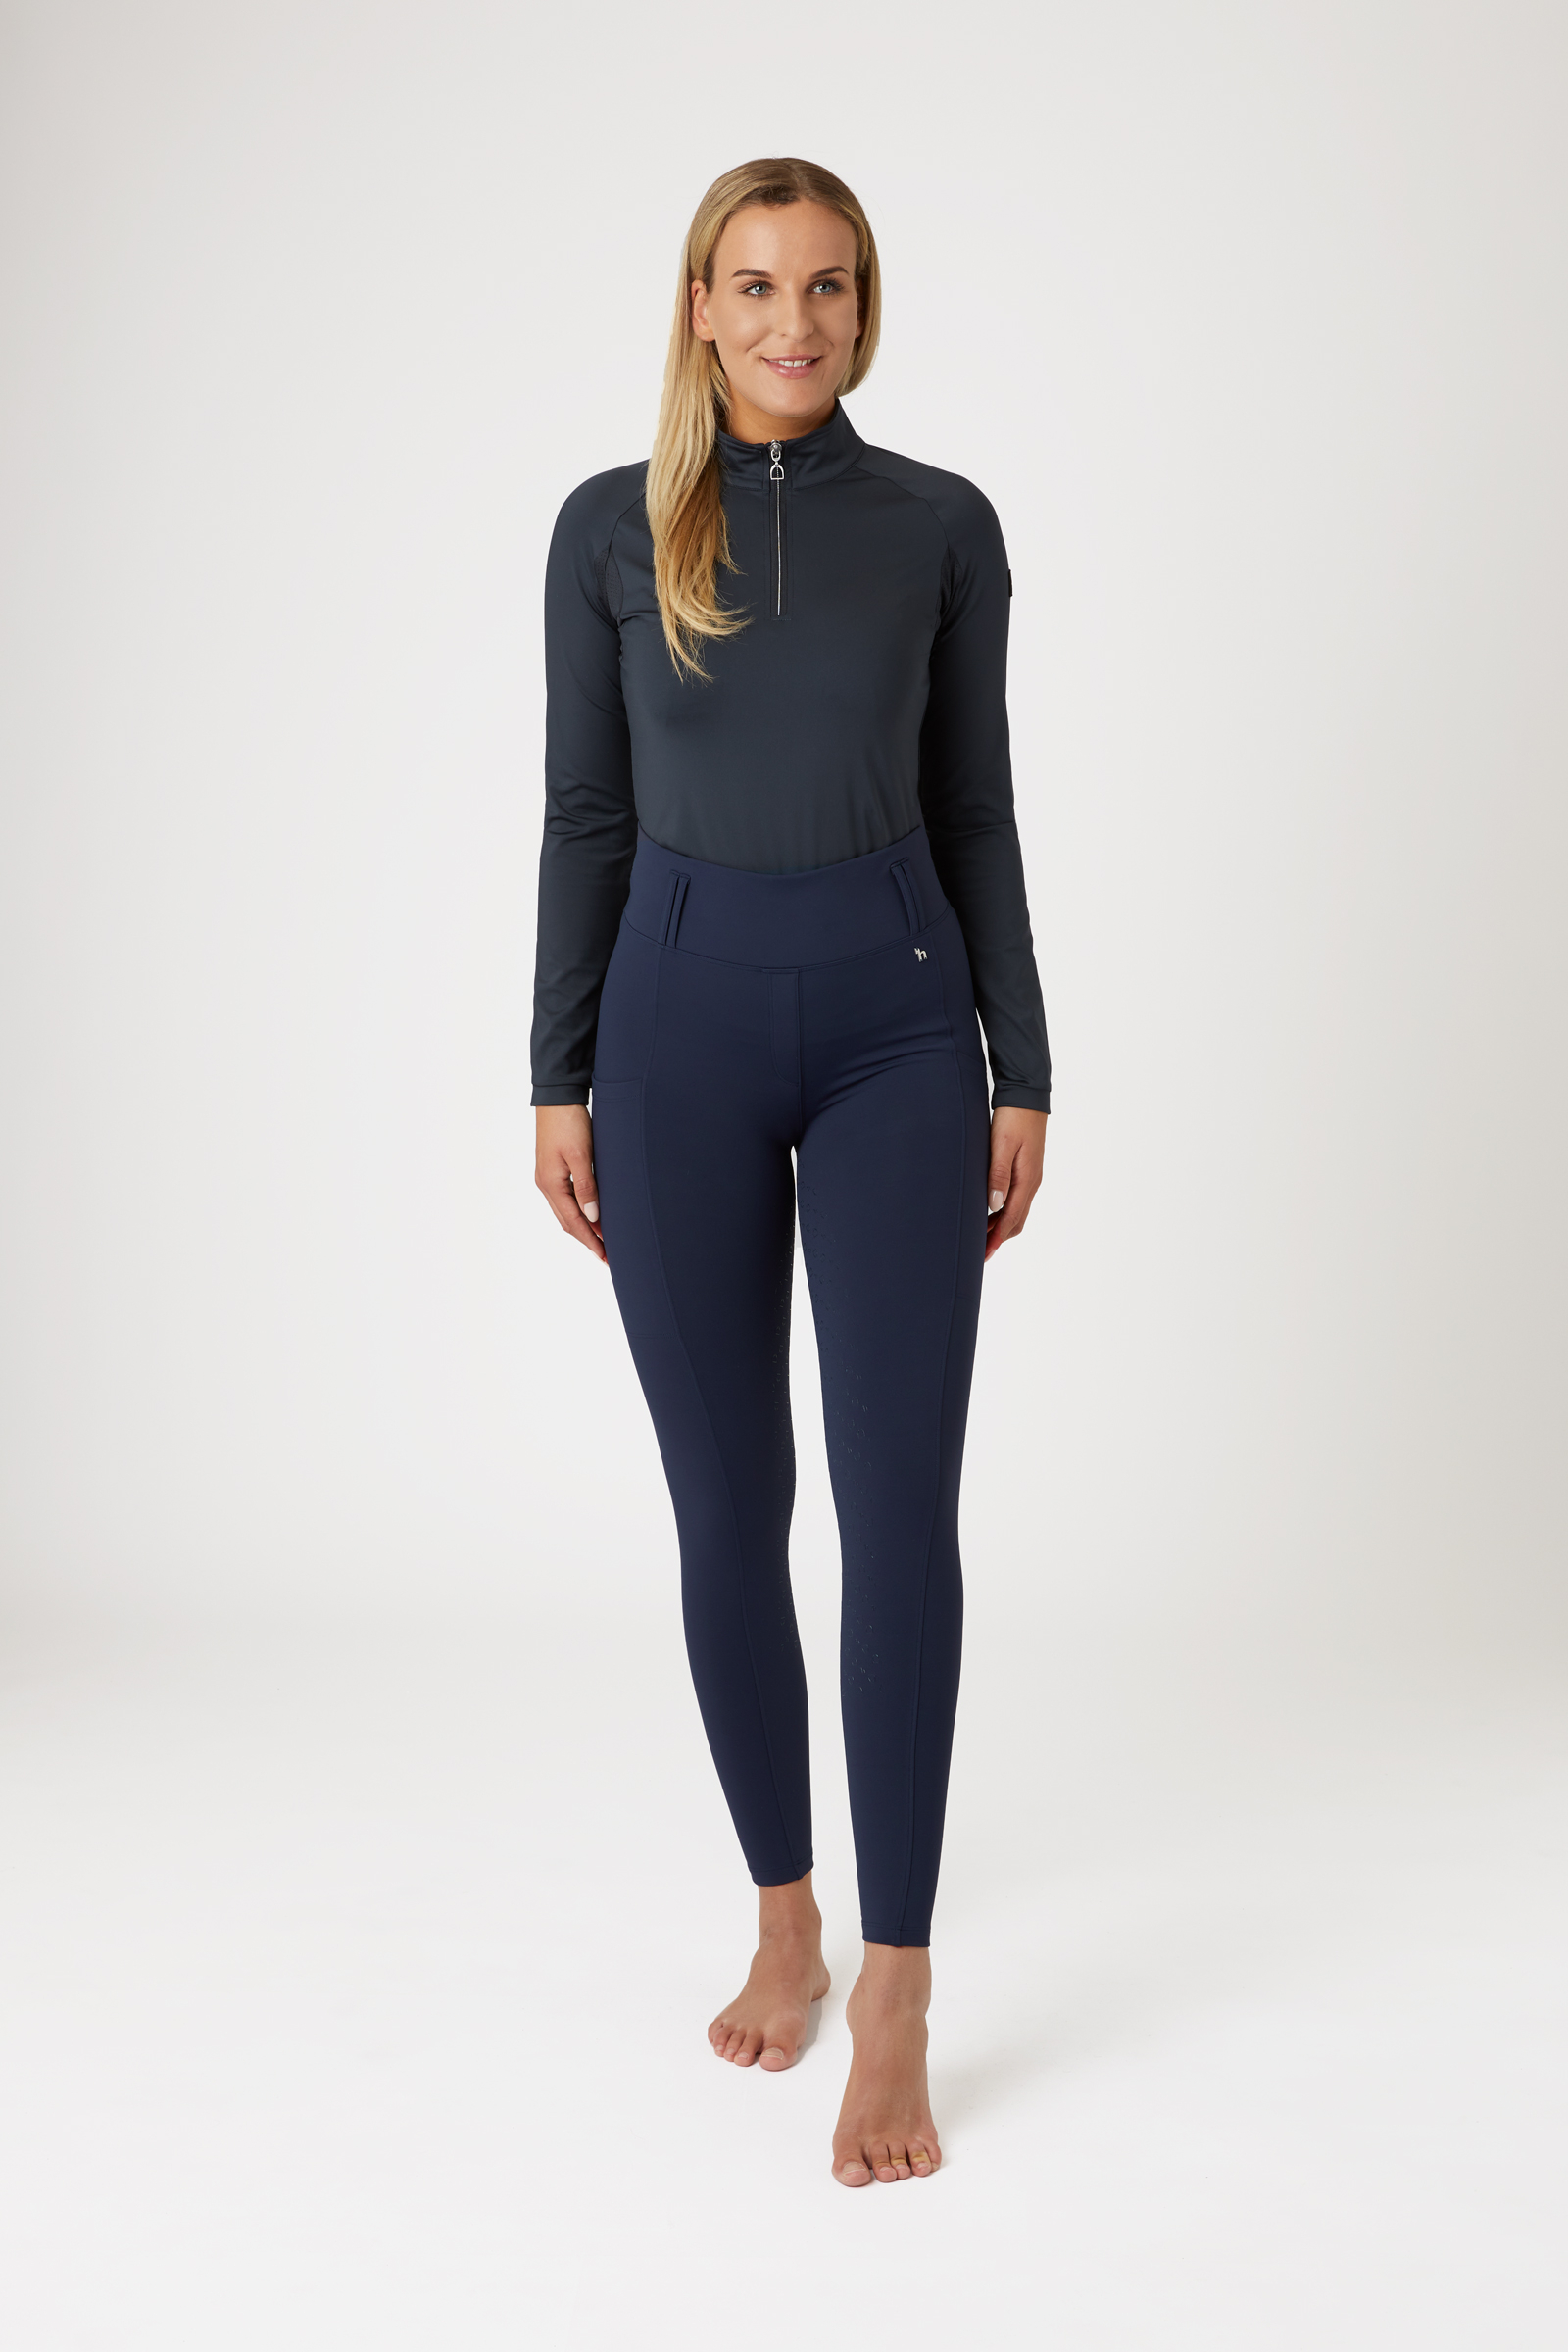 Equilux Ruby navy riding leggings